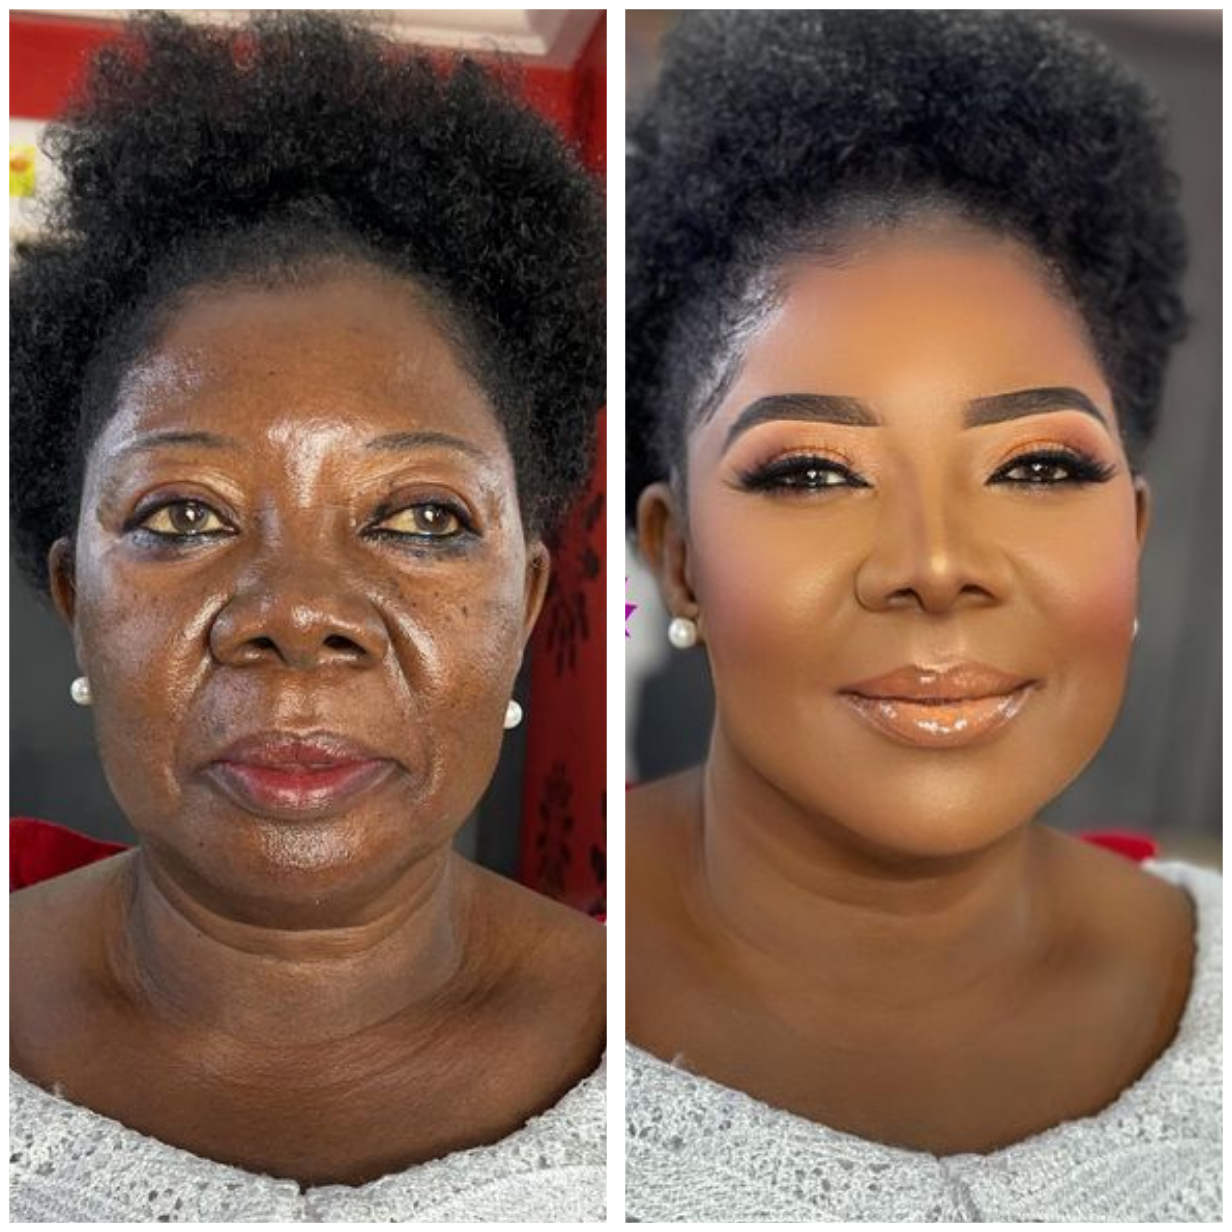 Check out the makeup transformation of a 75-year-old Ghanaian woman